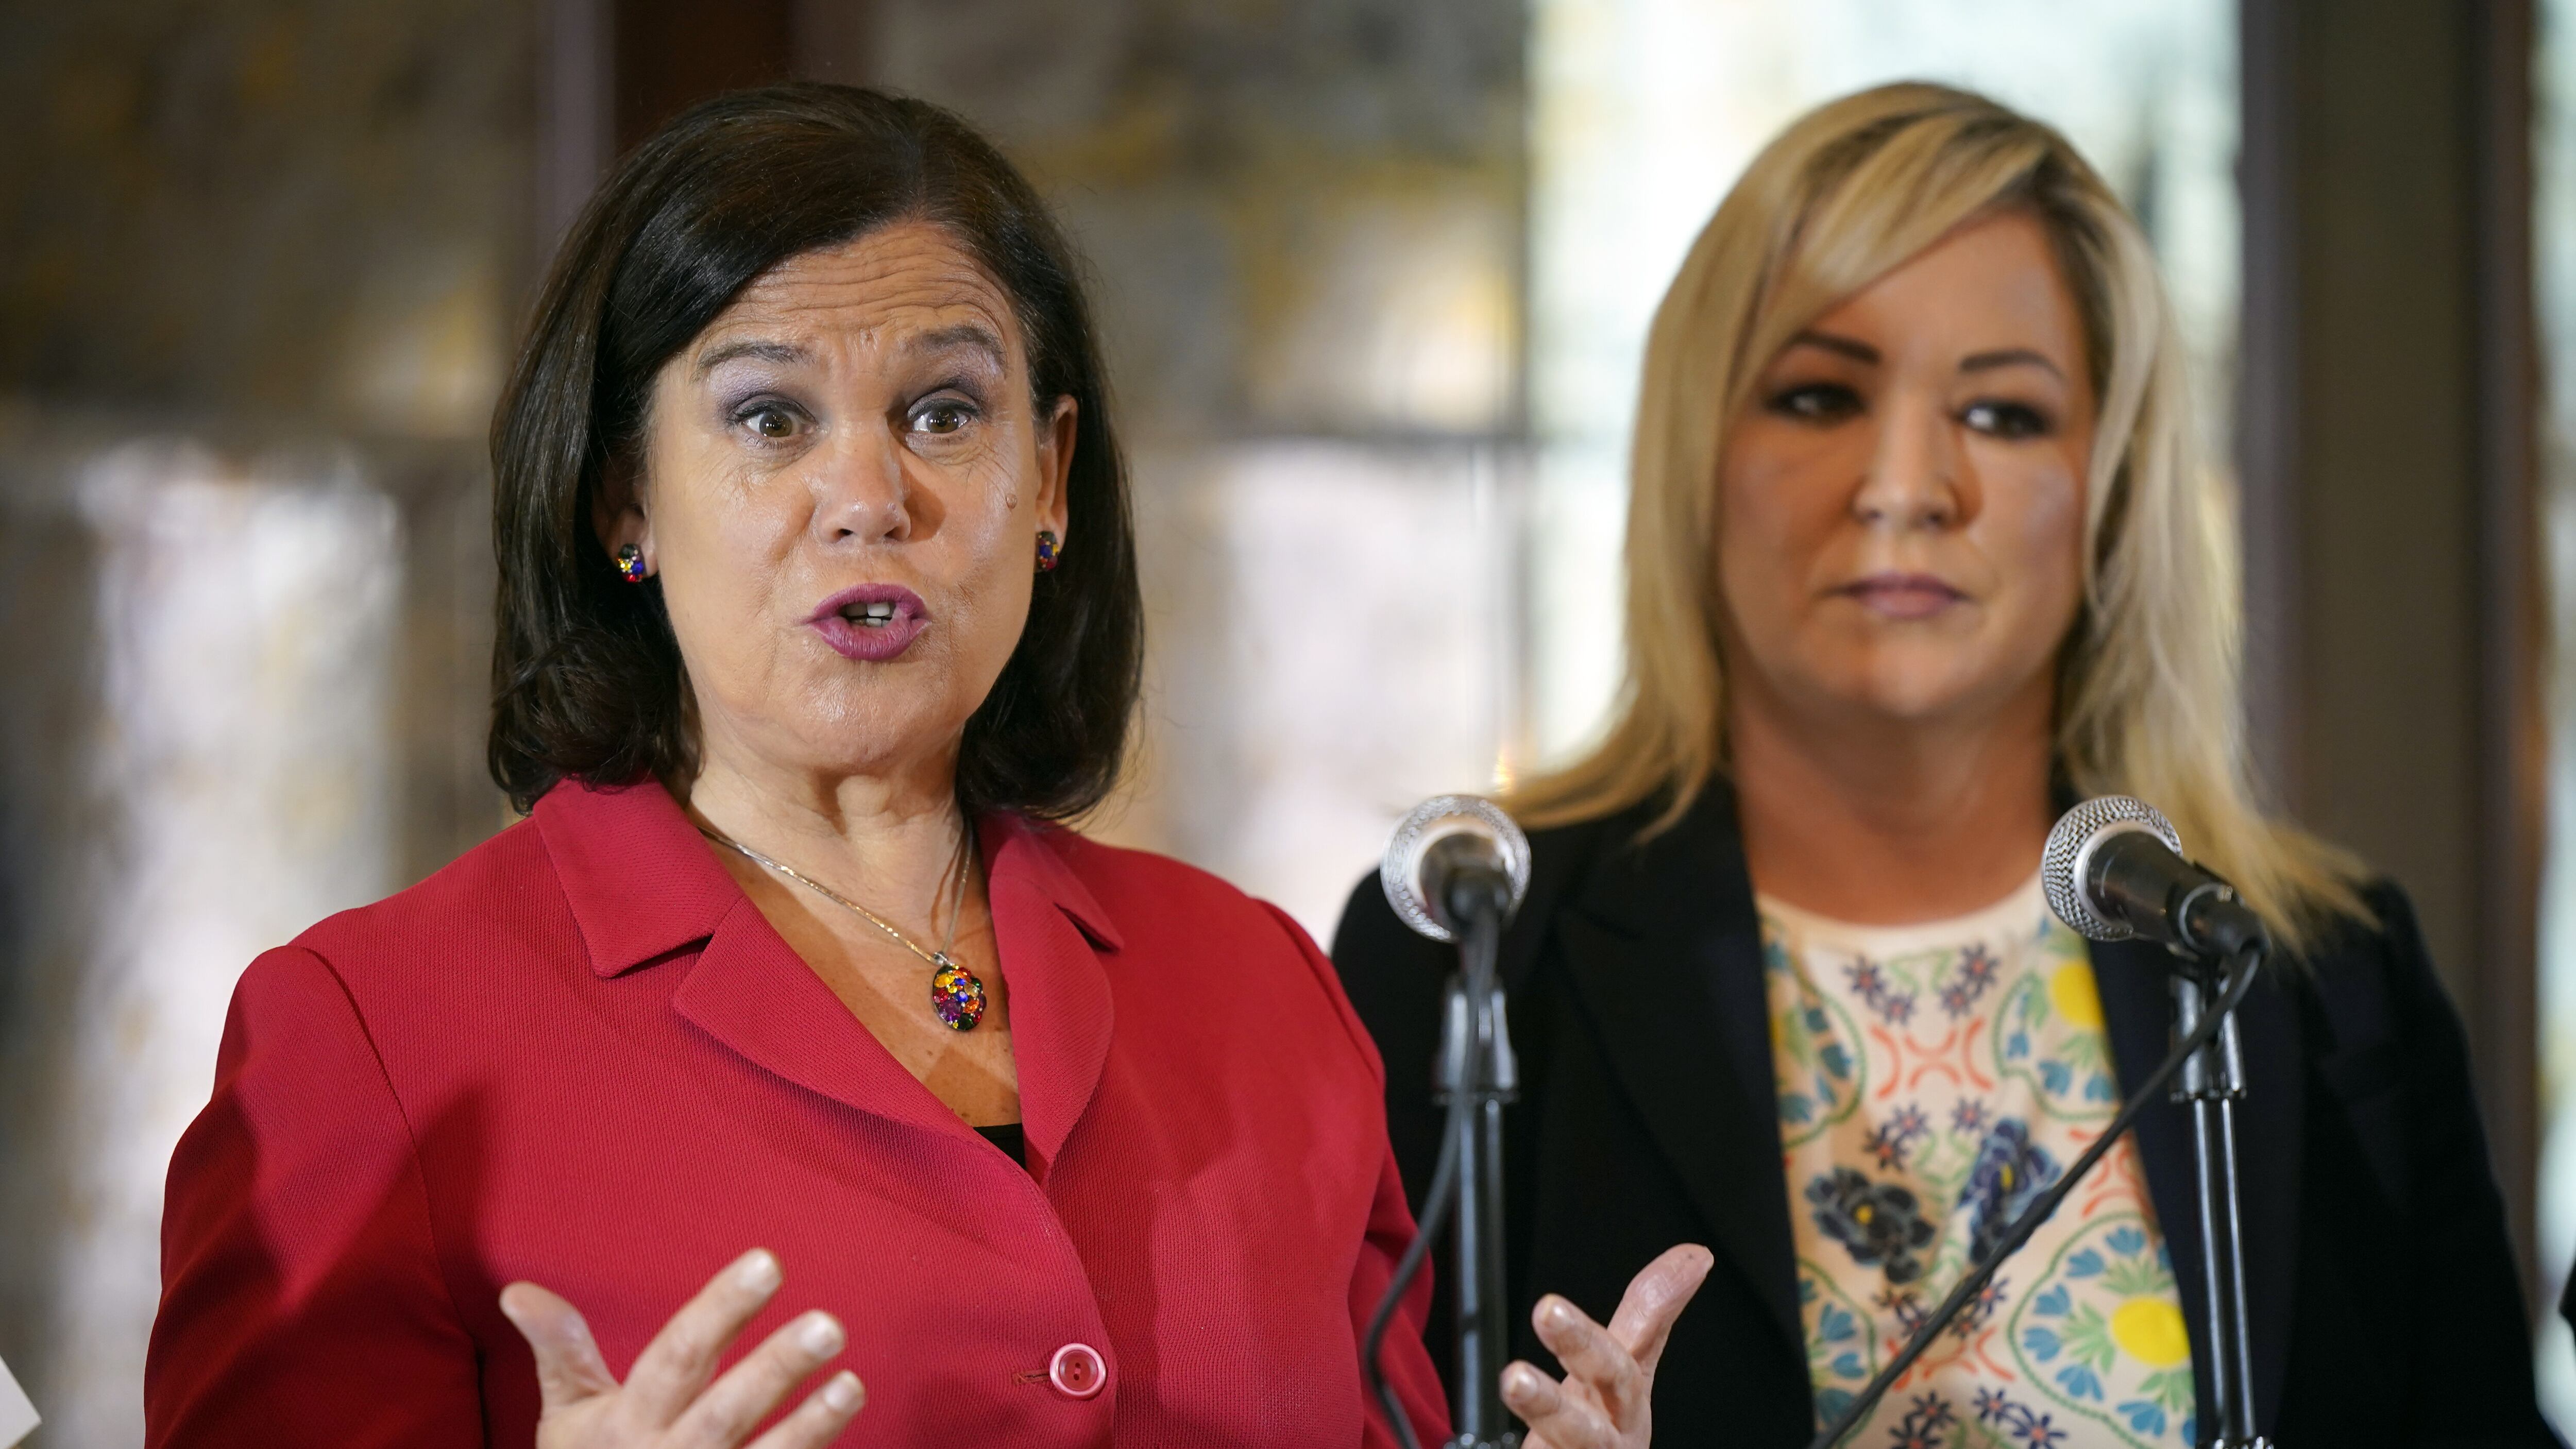 Sinn Fein Party leader Mary Lou McDonald and vice president Michelle O’Neill will attend the talks at Hillsborough Castle (Niall Carson/PA)